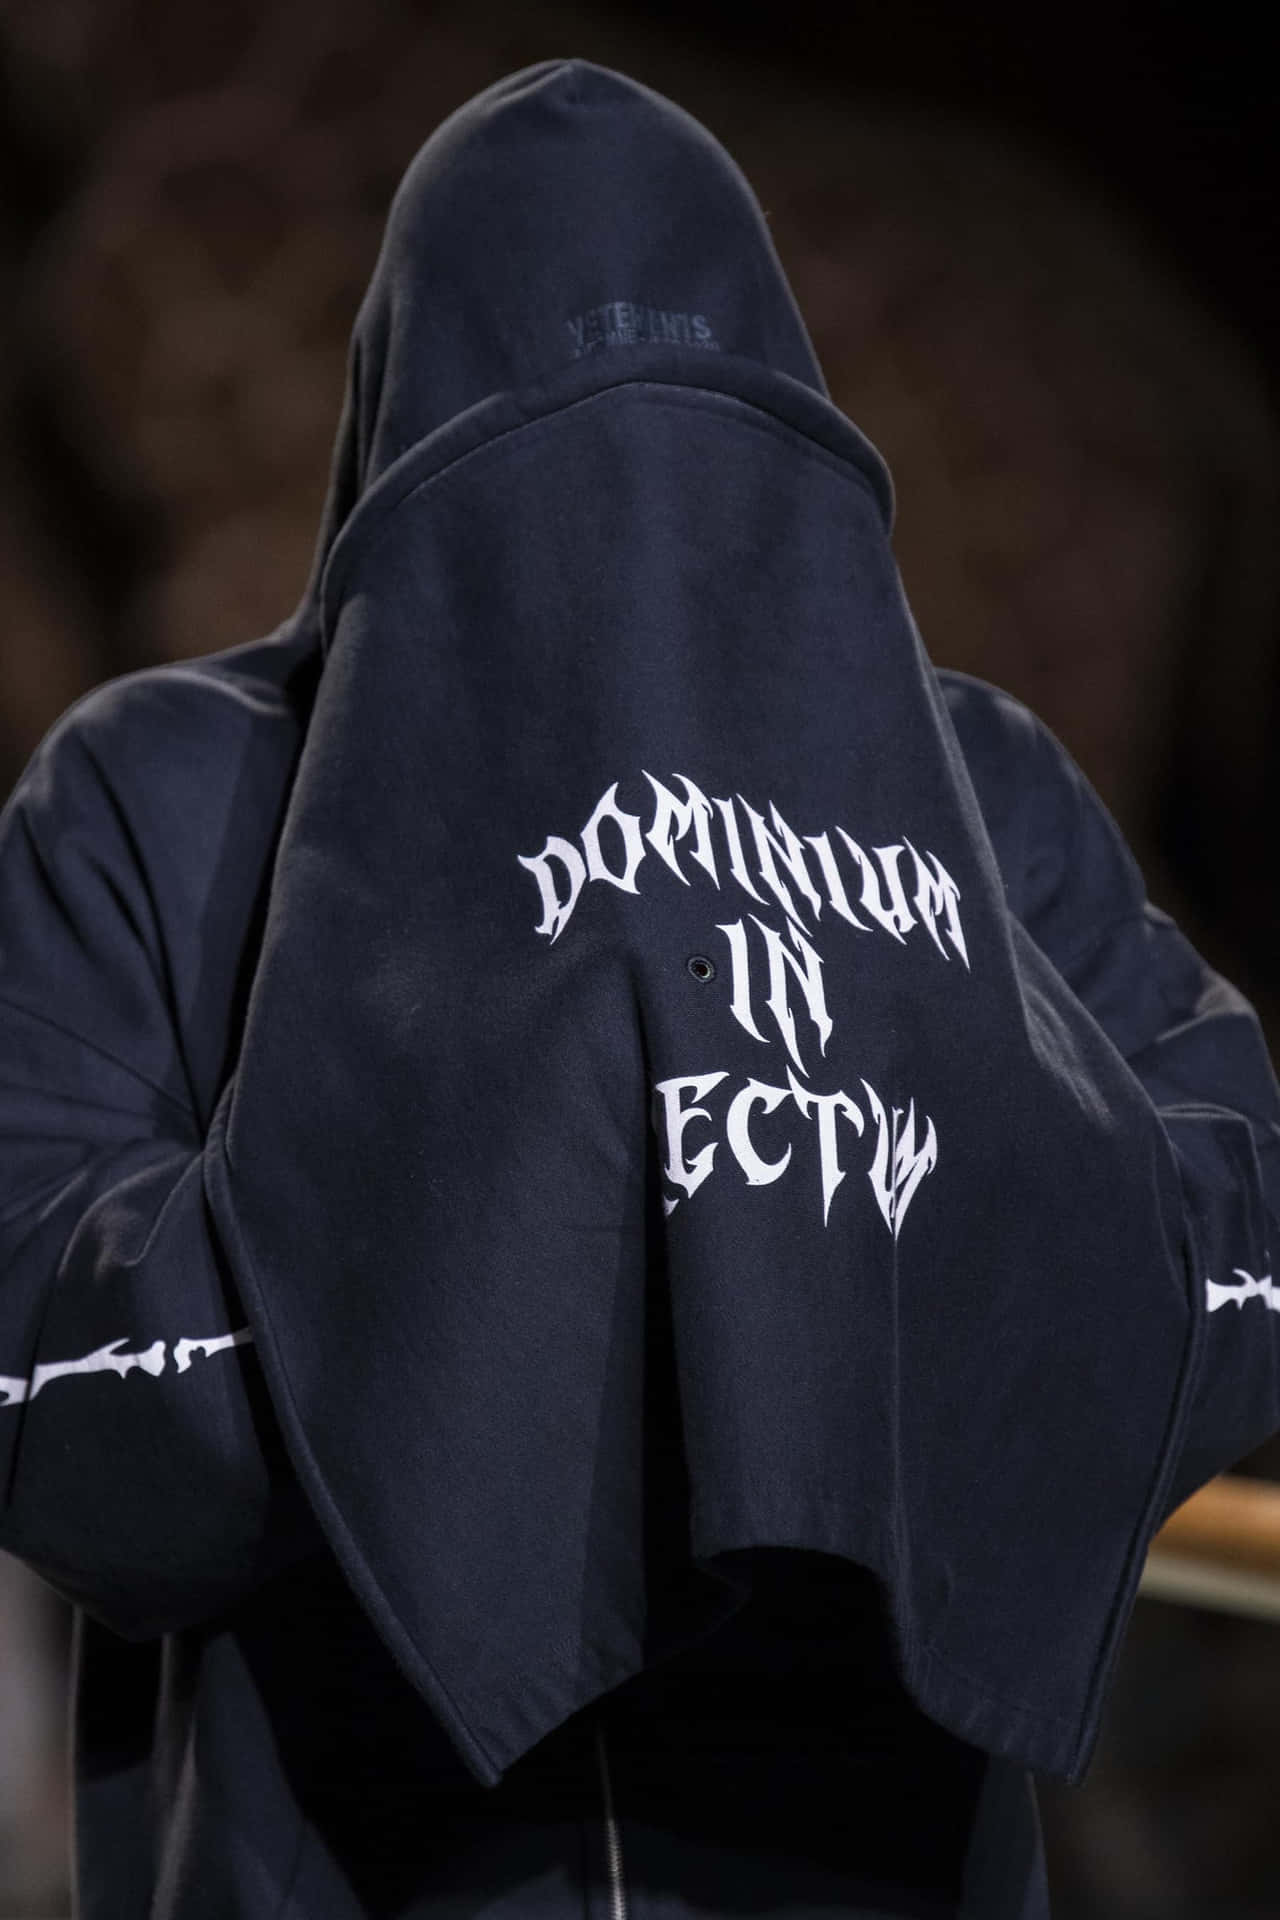 Showcasing the bold designs of Vetements